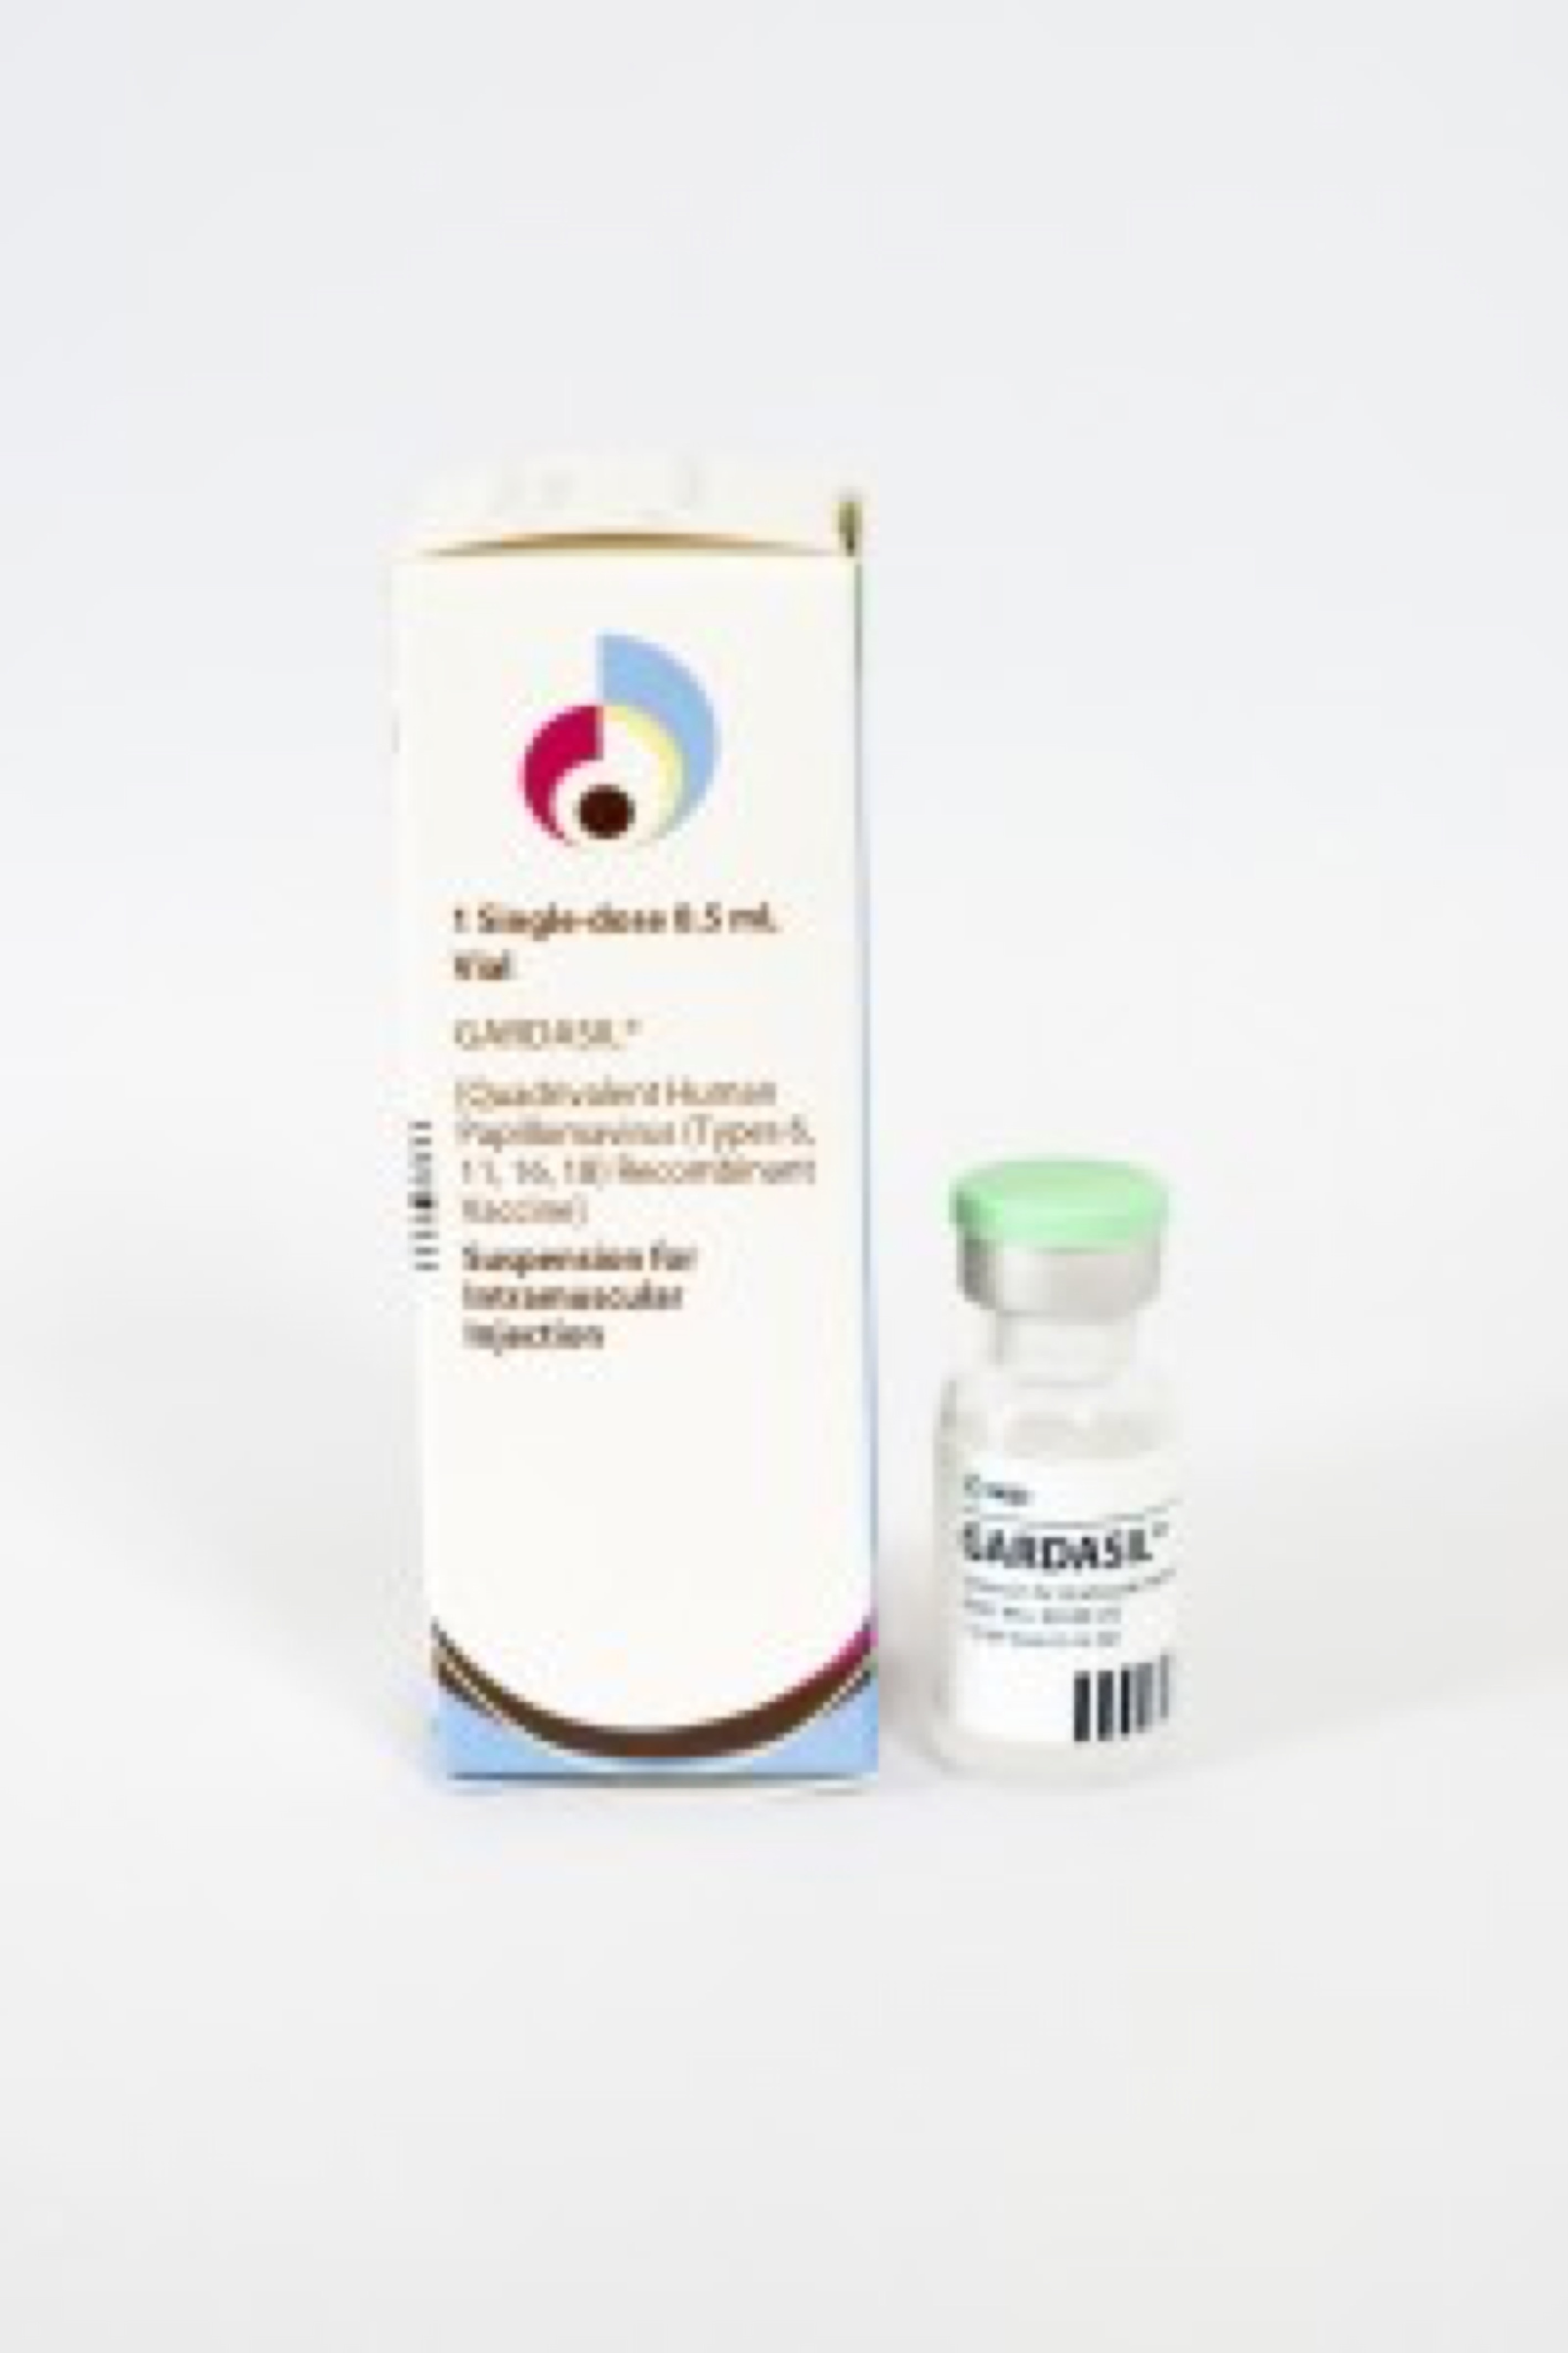 Chiangrai, Thailand - May 12, 2014: another package of HPV (GARDASIL) vaccine from MSD,shallow focus